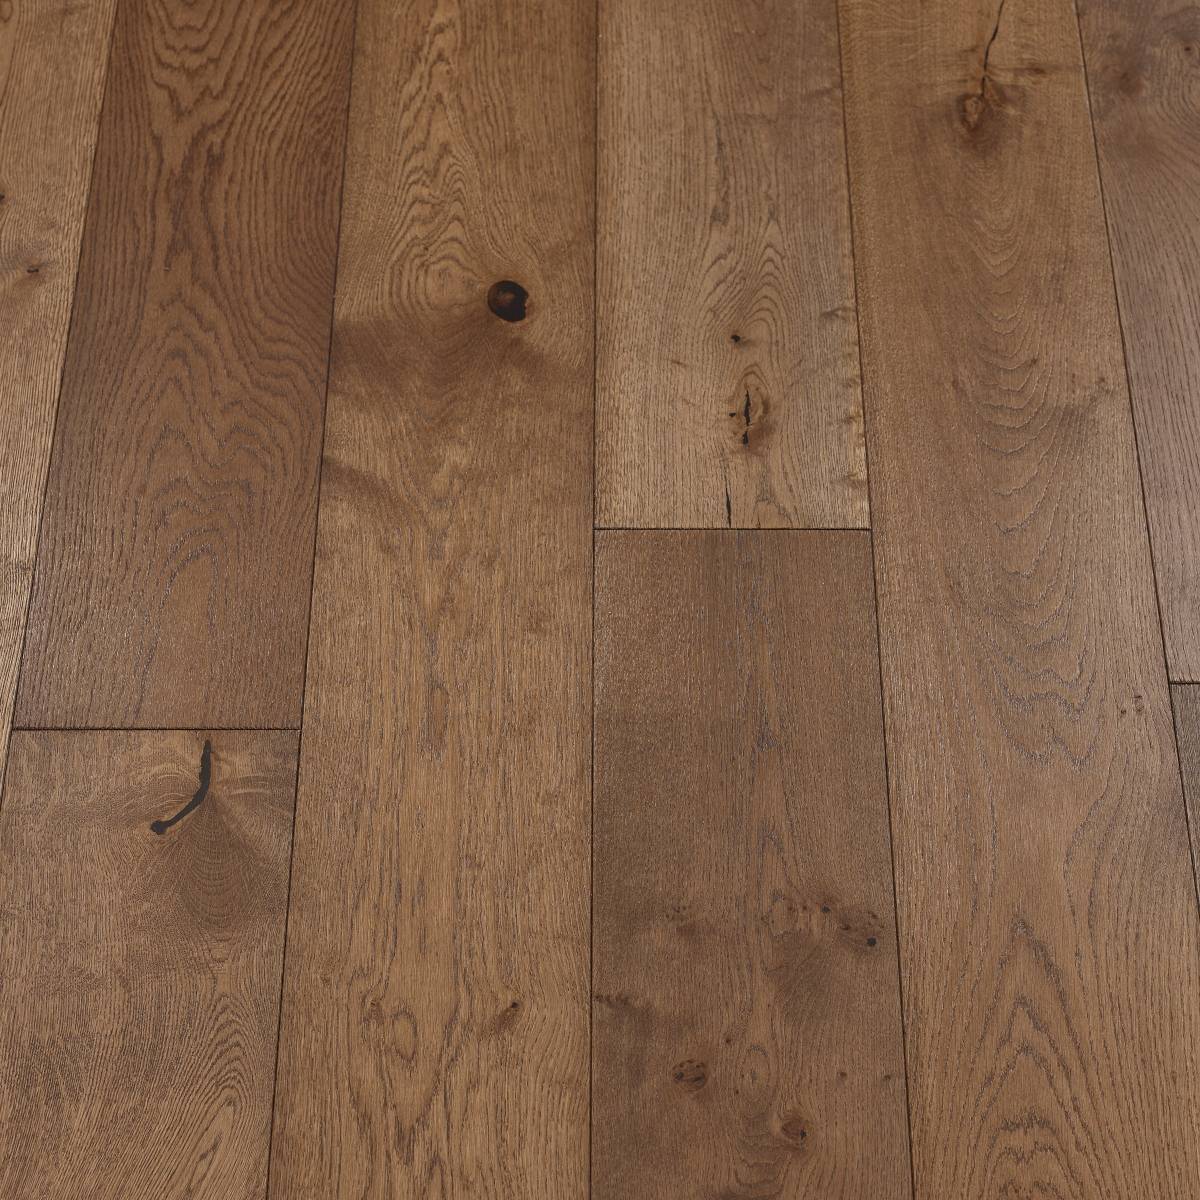 Classic Coffee Wood Flooring - image presenting a rich coffee-coloured wood flooring with deep brown tones, creating a warm and inviting atmosphere.